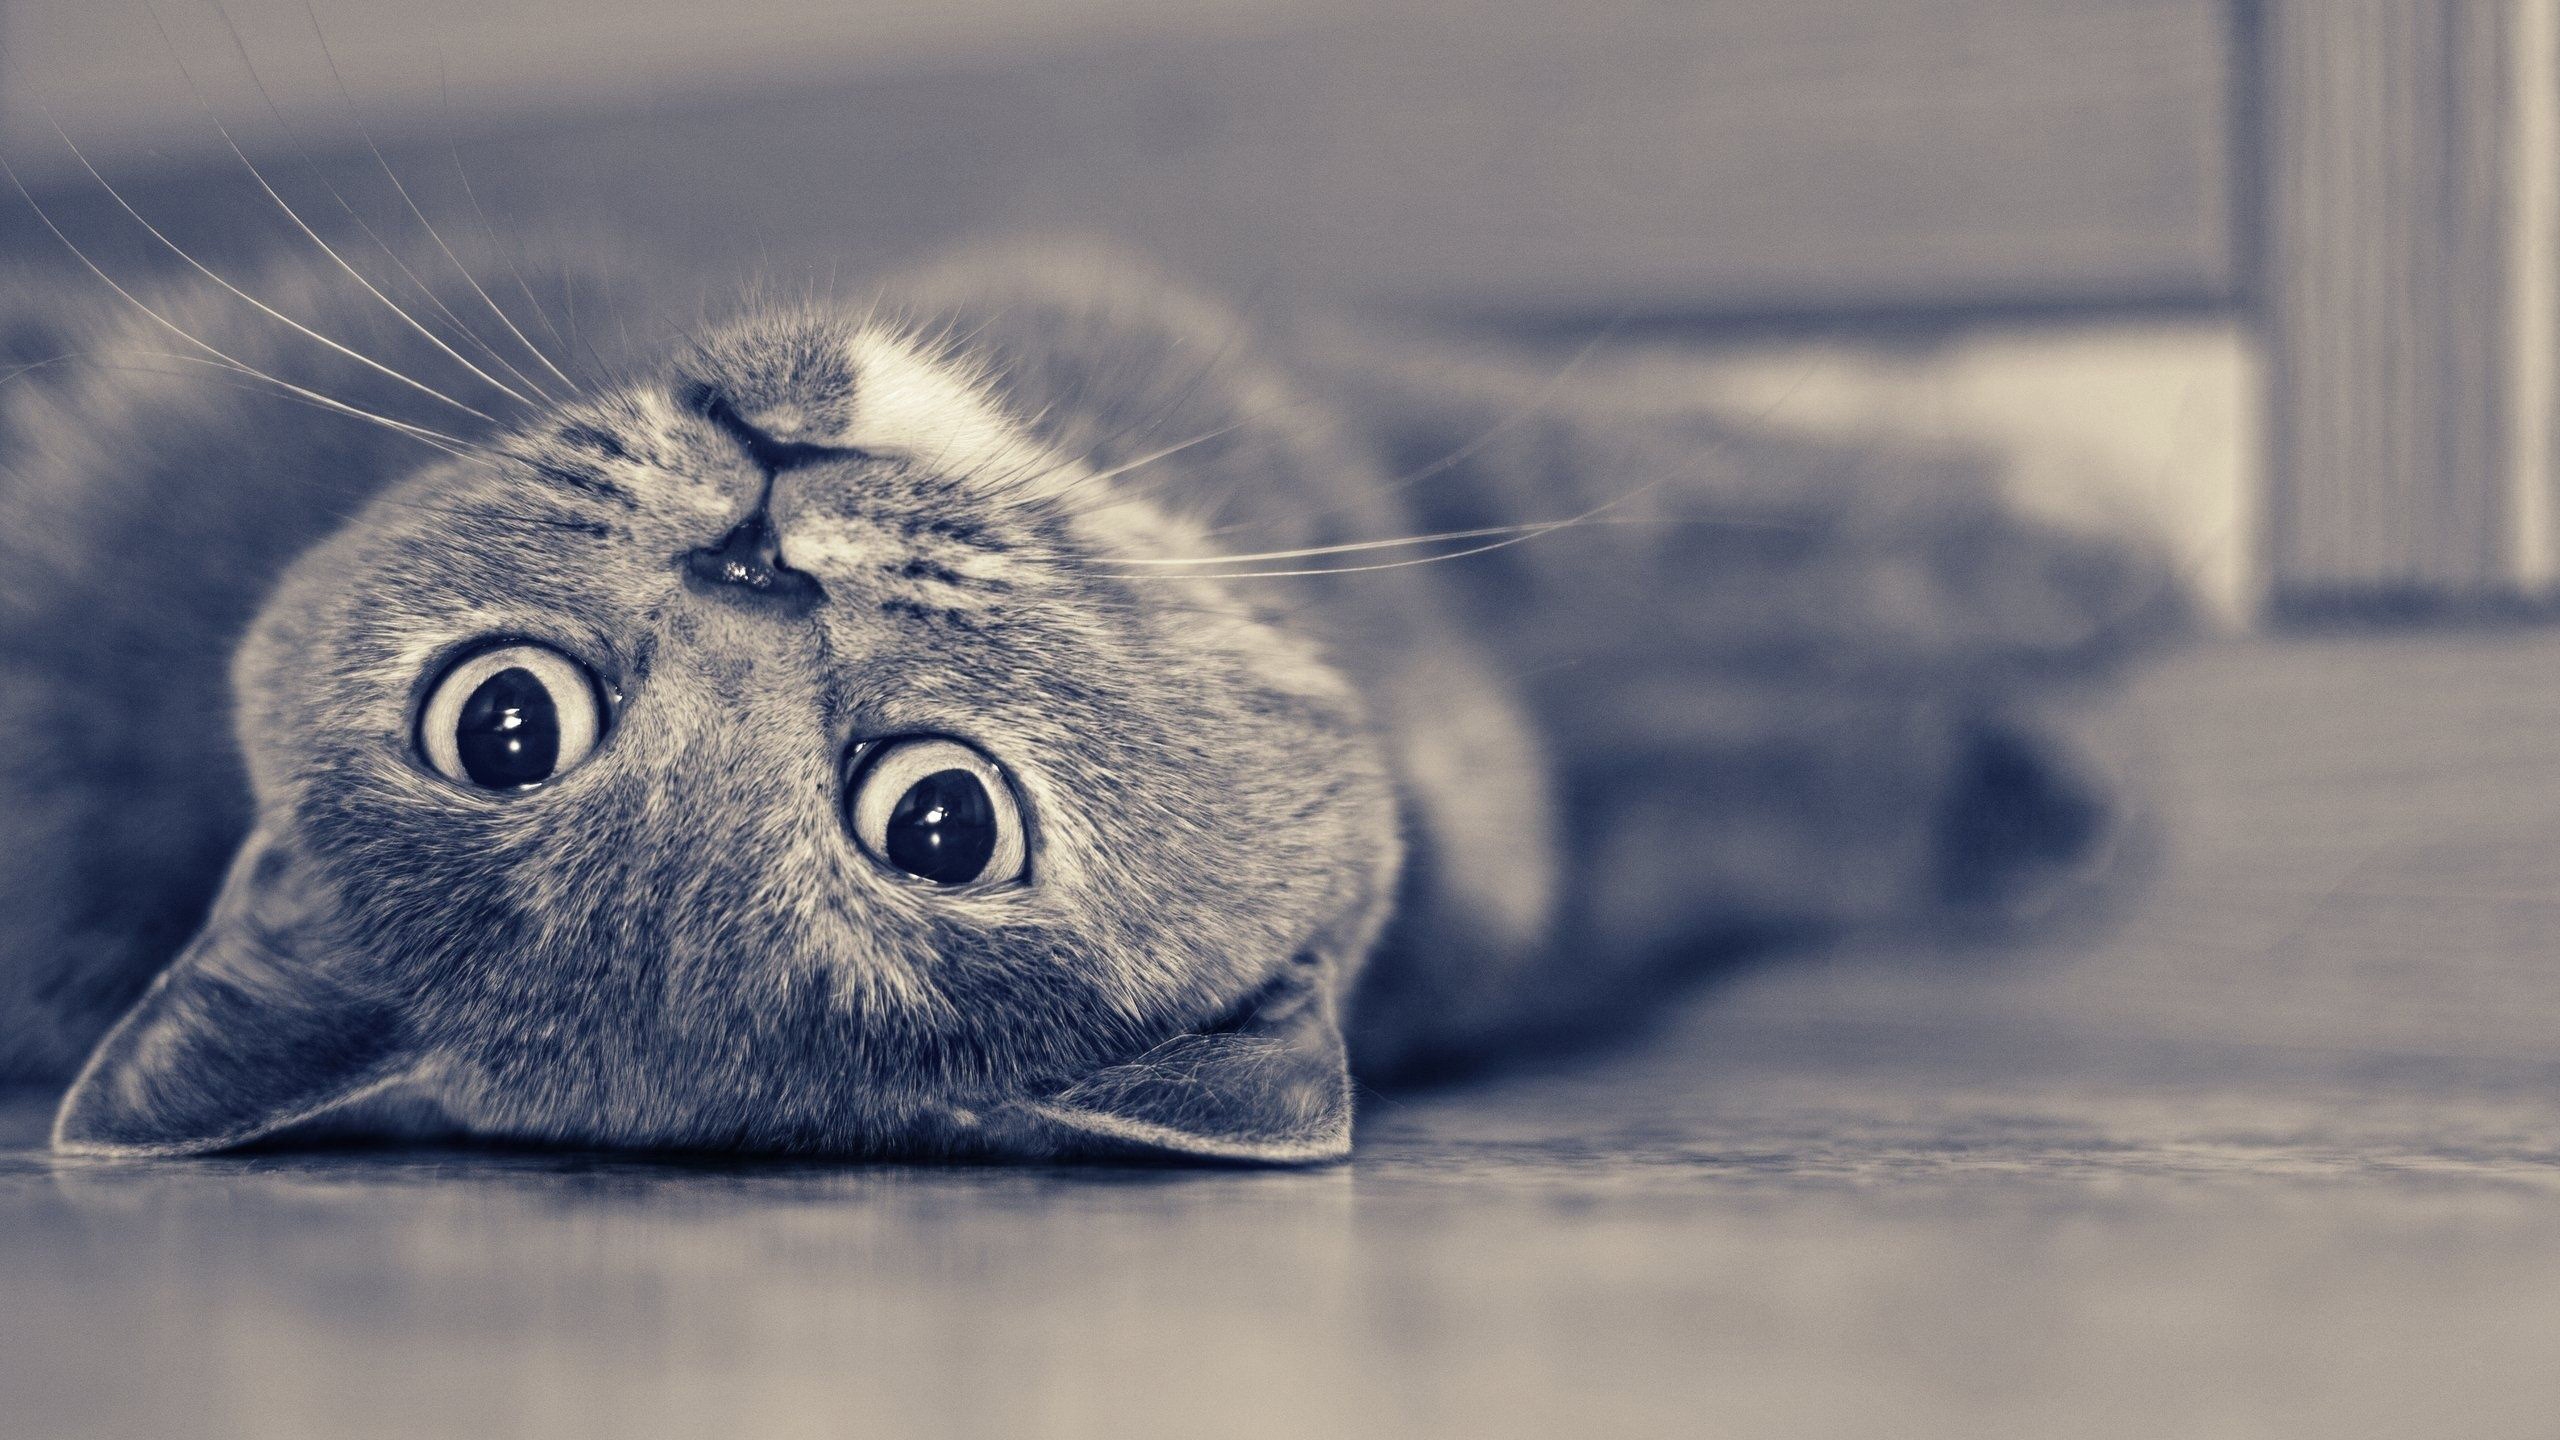 Vintage Cute Cat for 2560x1440 HDTV resolution